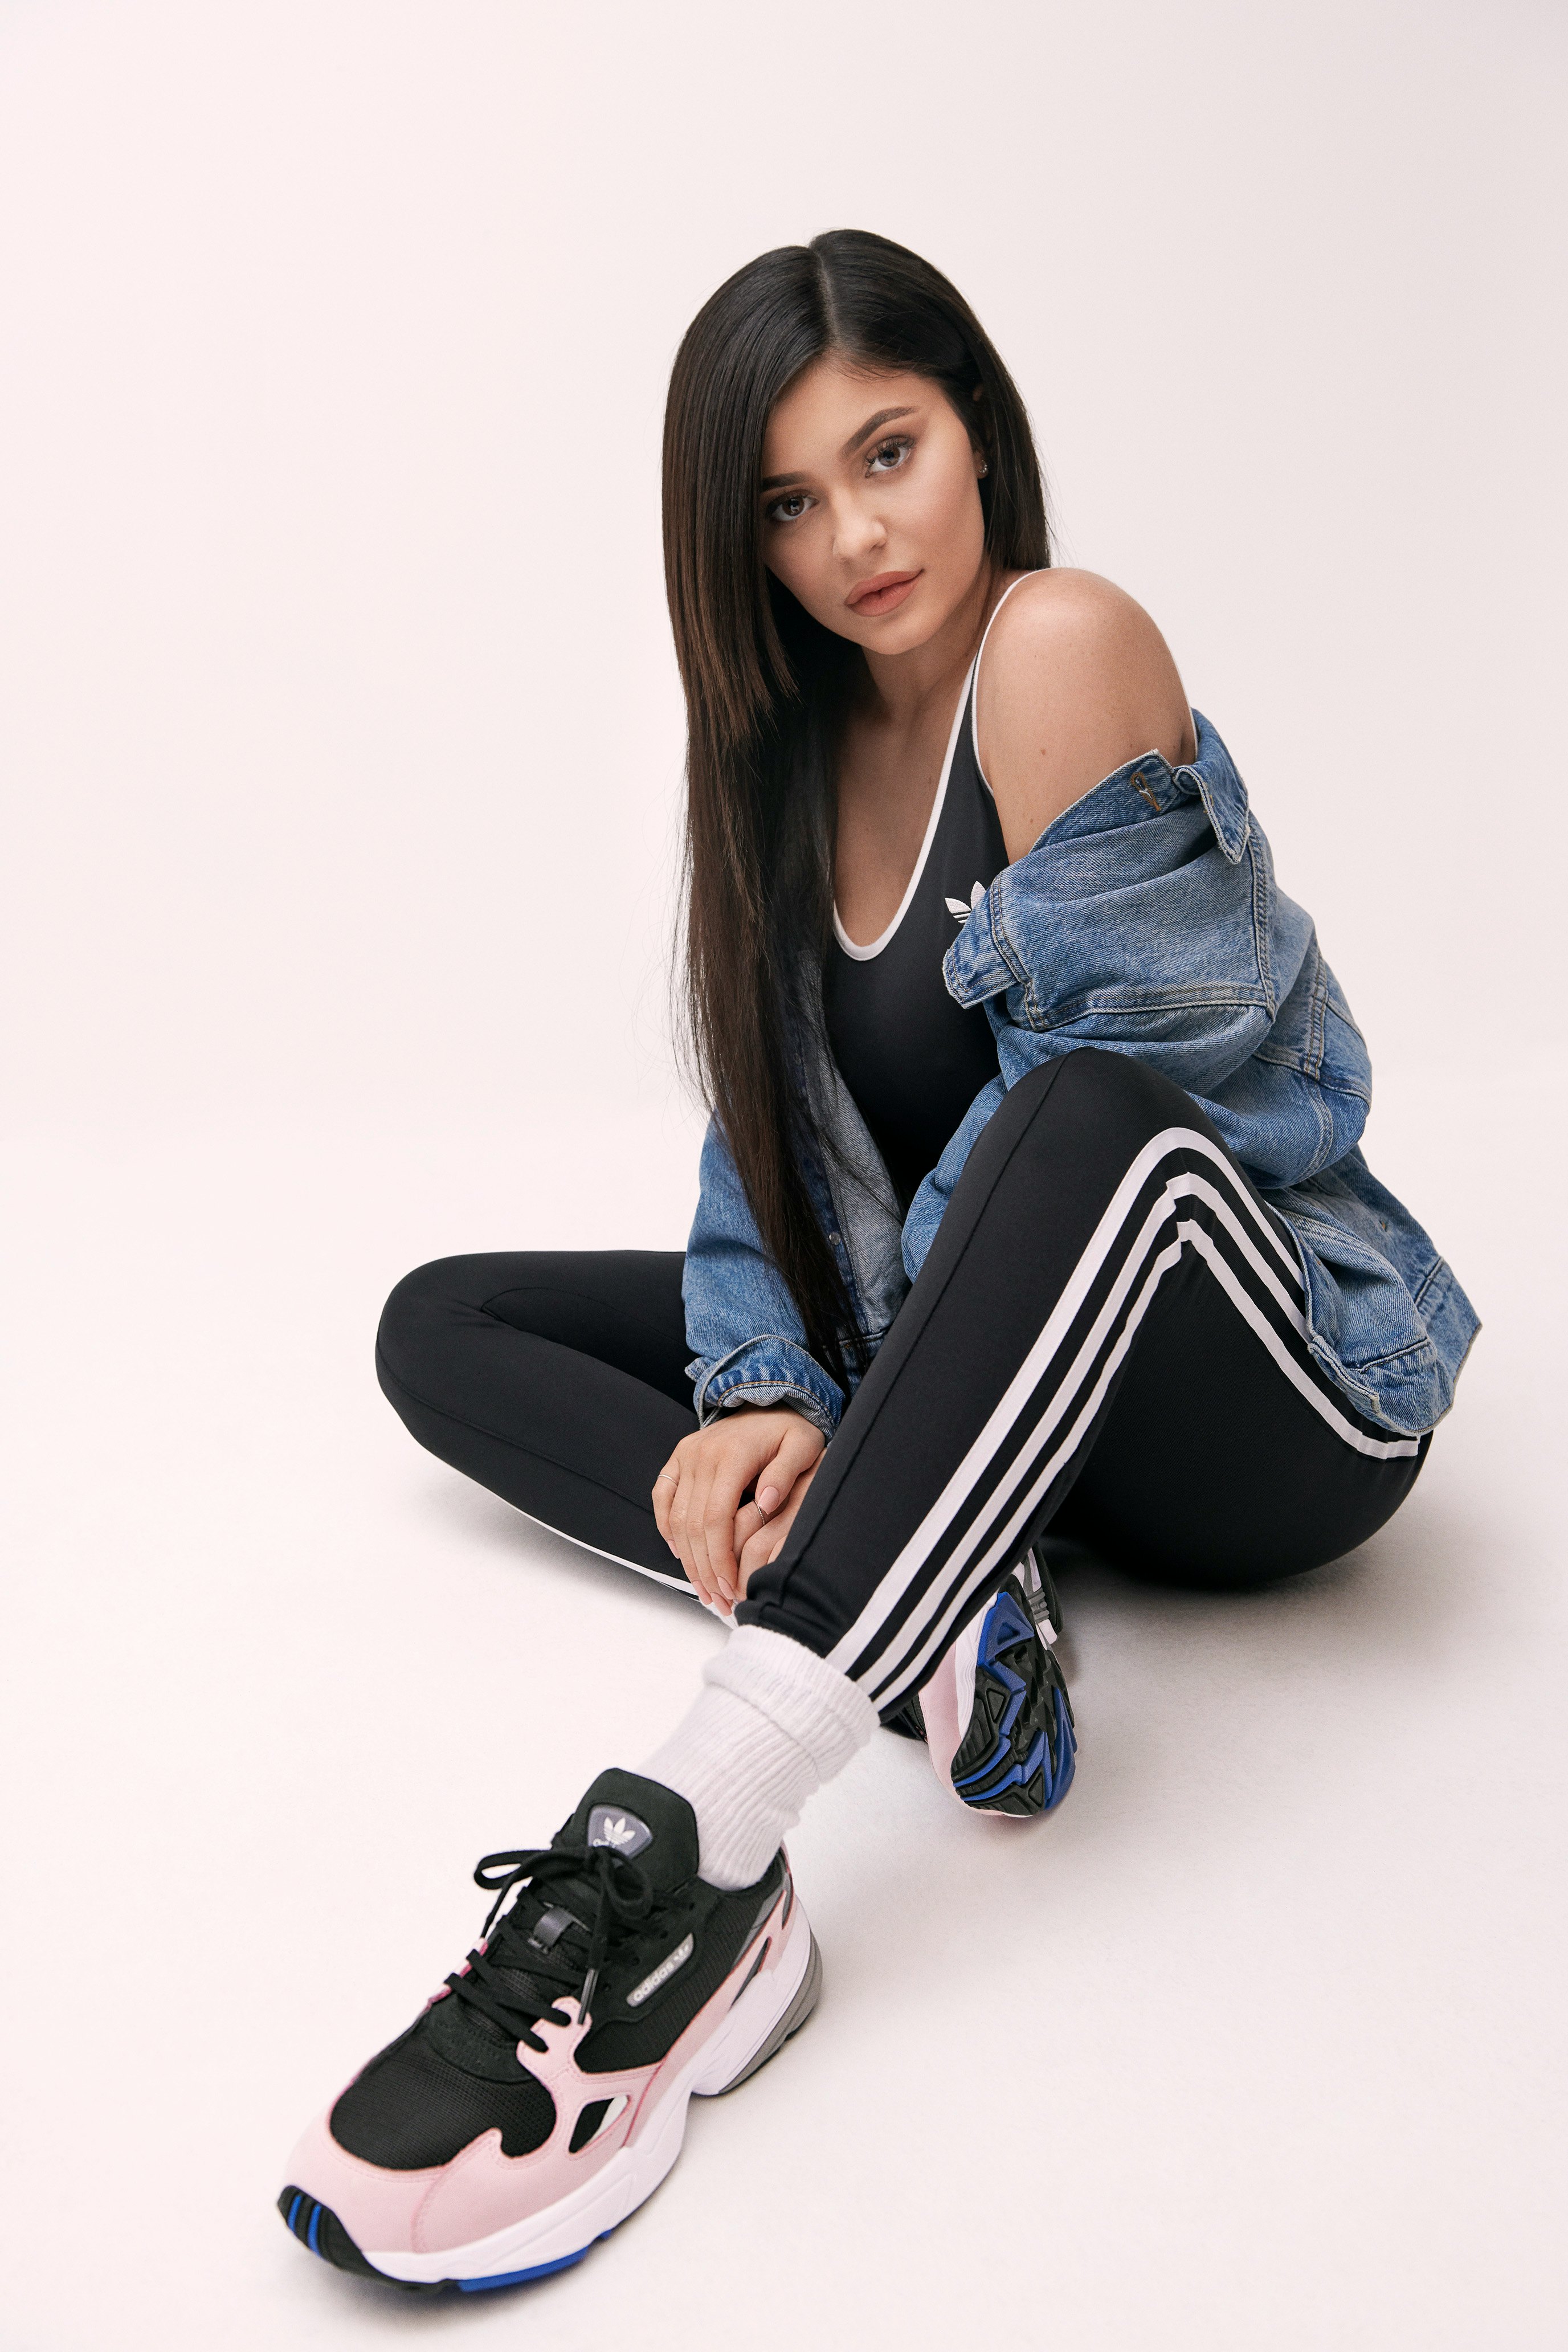 kylie x adidas shoes